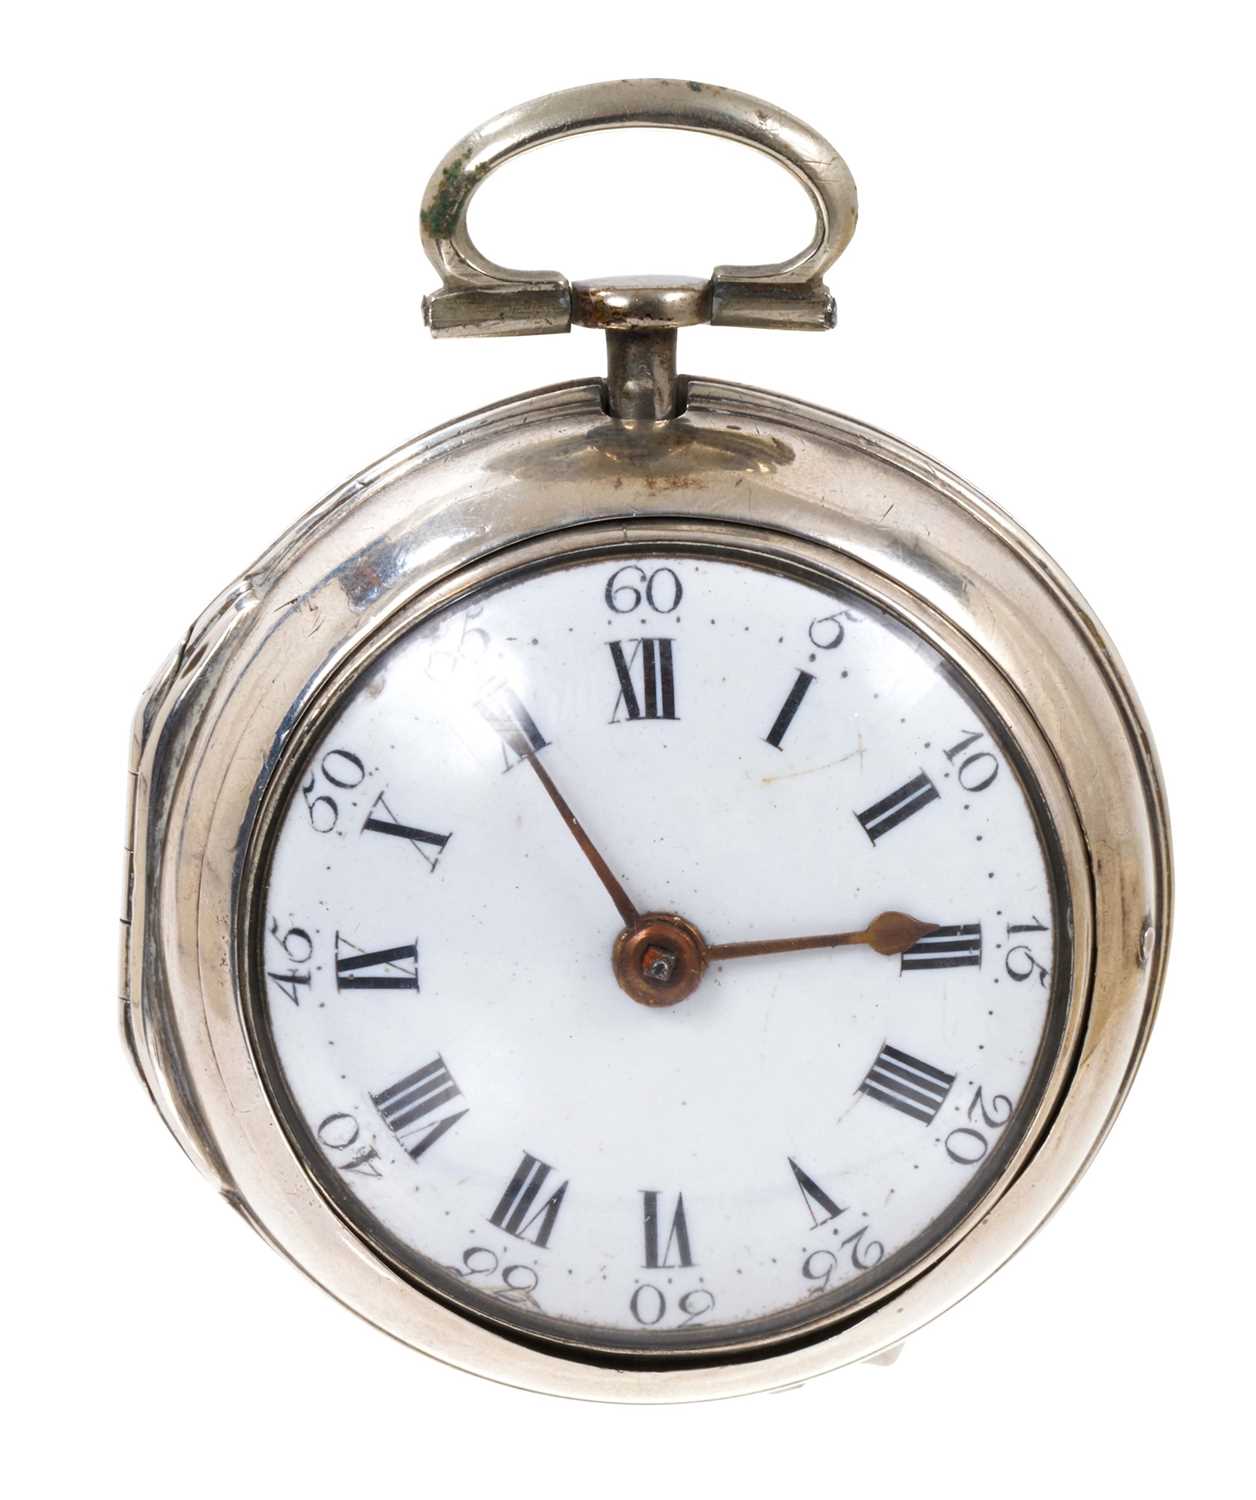 Mid 18th silver pair-cased pocket watch